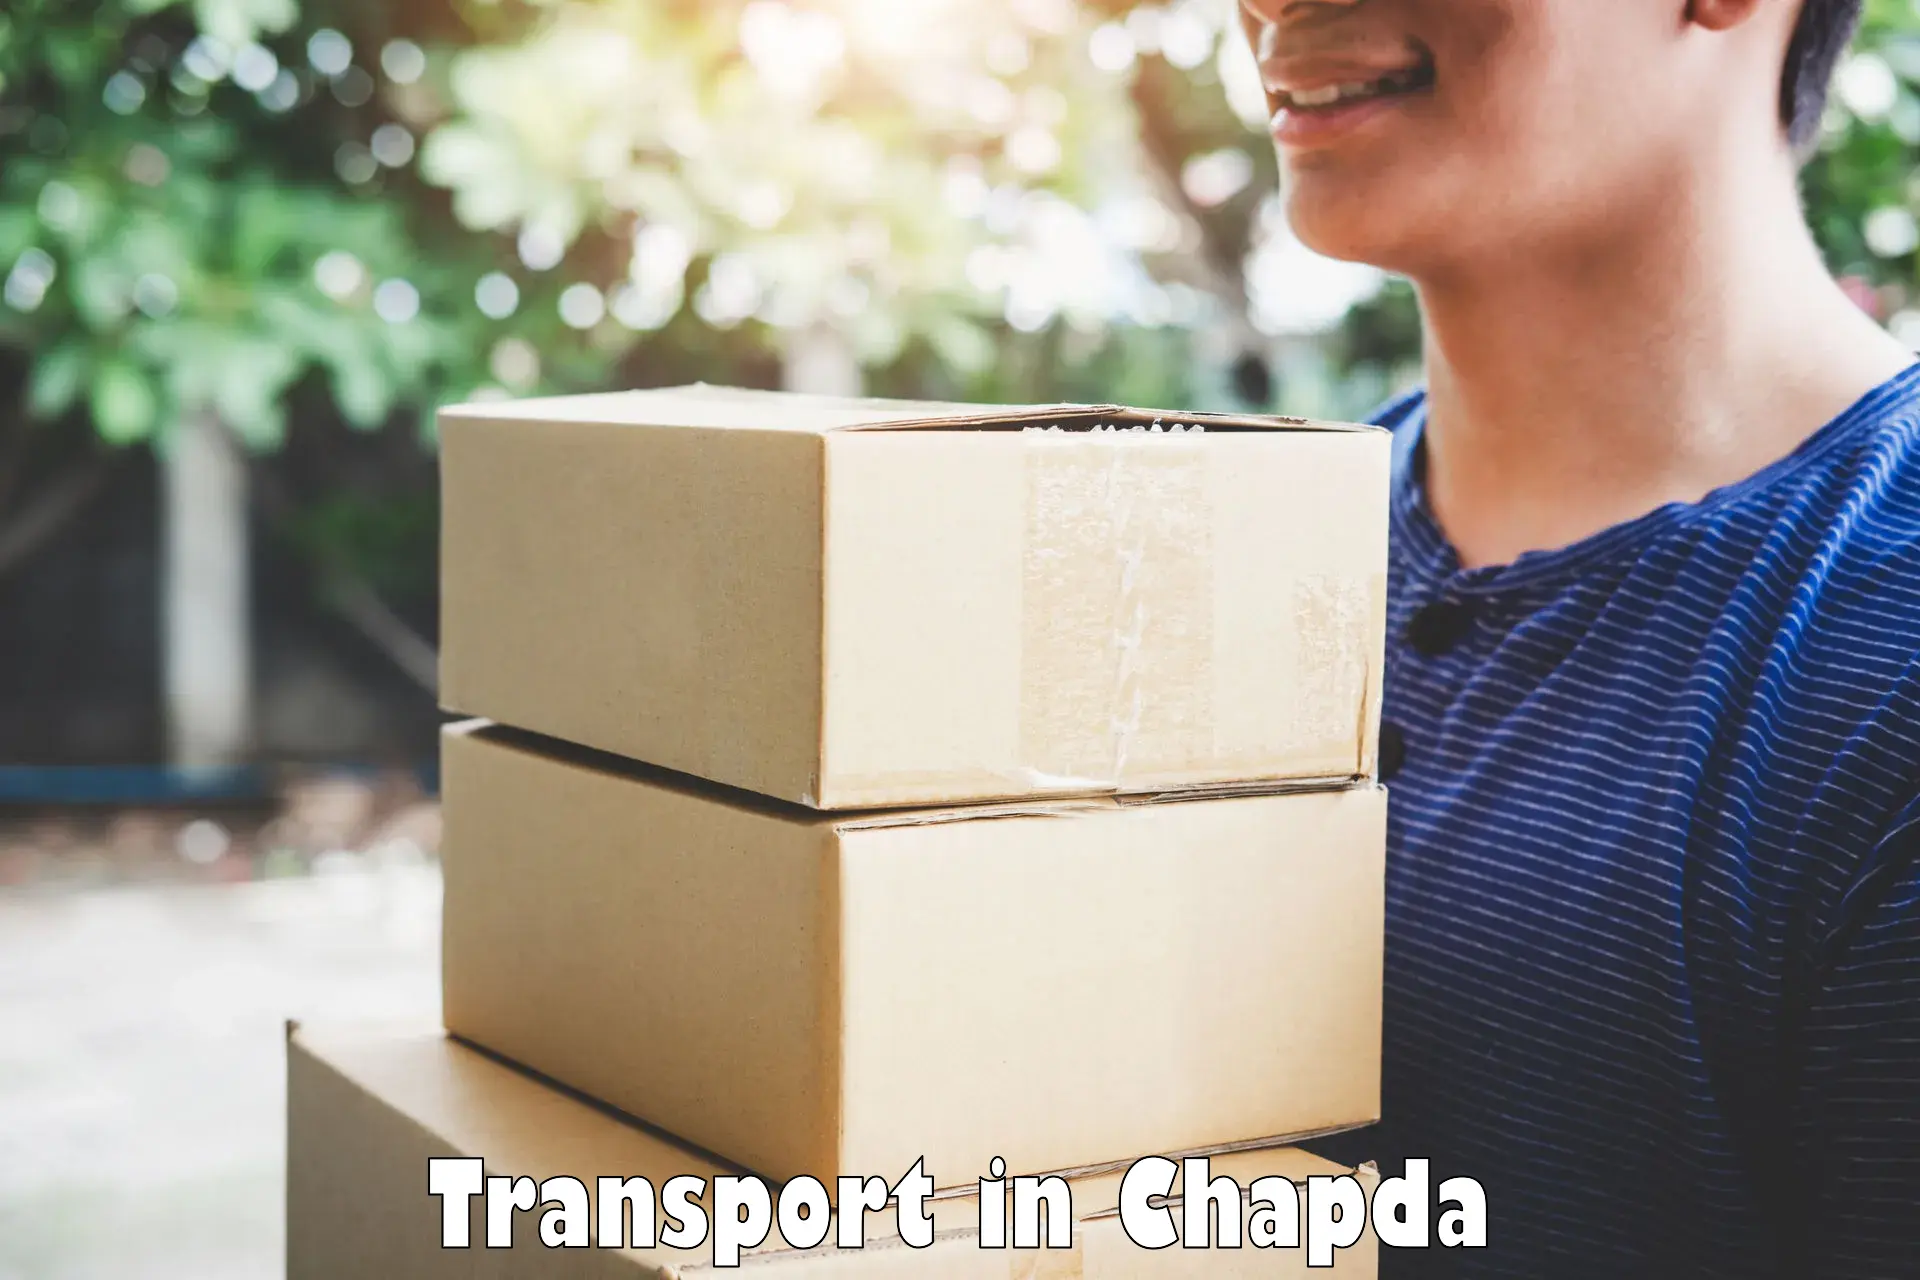 Cargo transportation services in Chapda